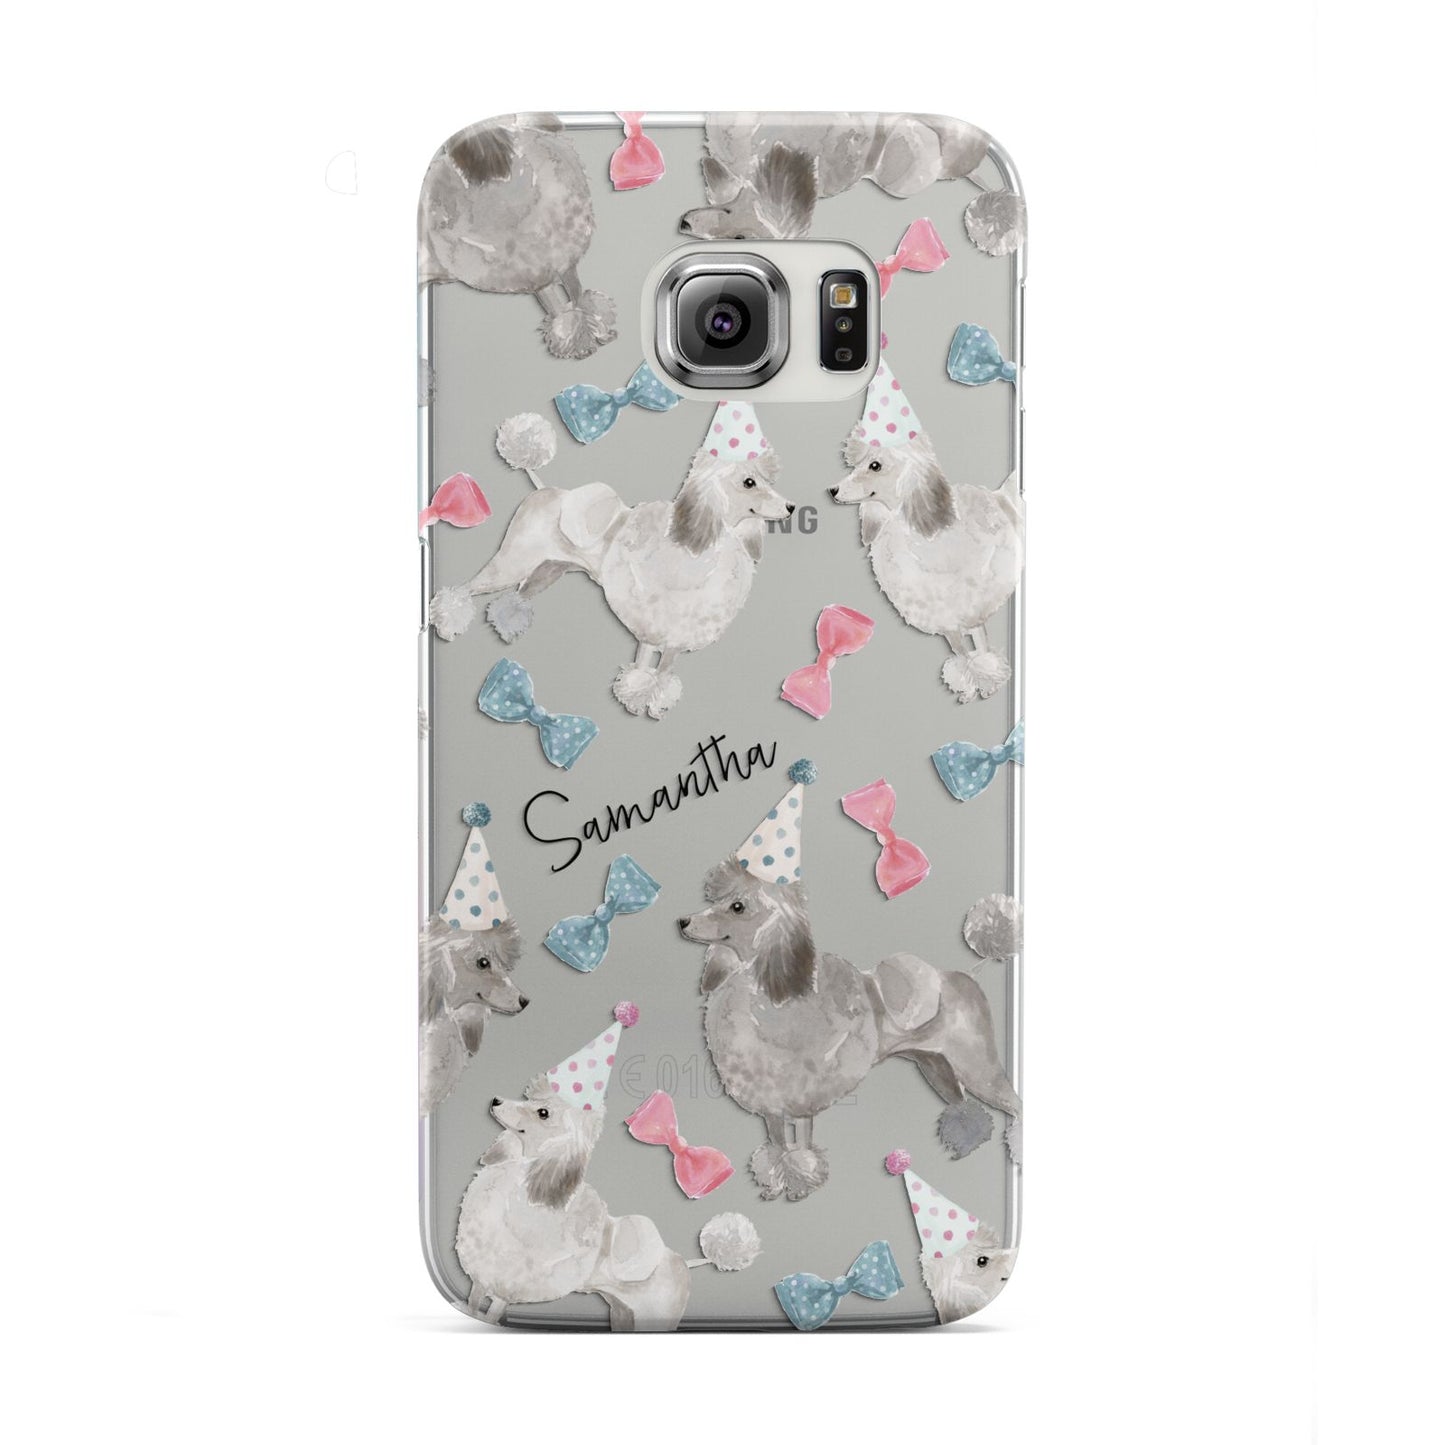 Personalised Poodle Dog Samsung Galaxy S6 Edge Case